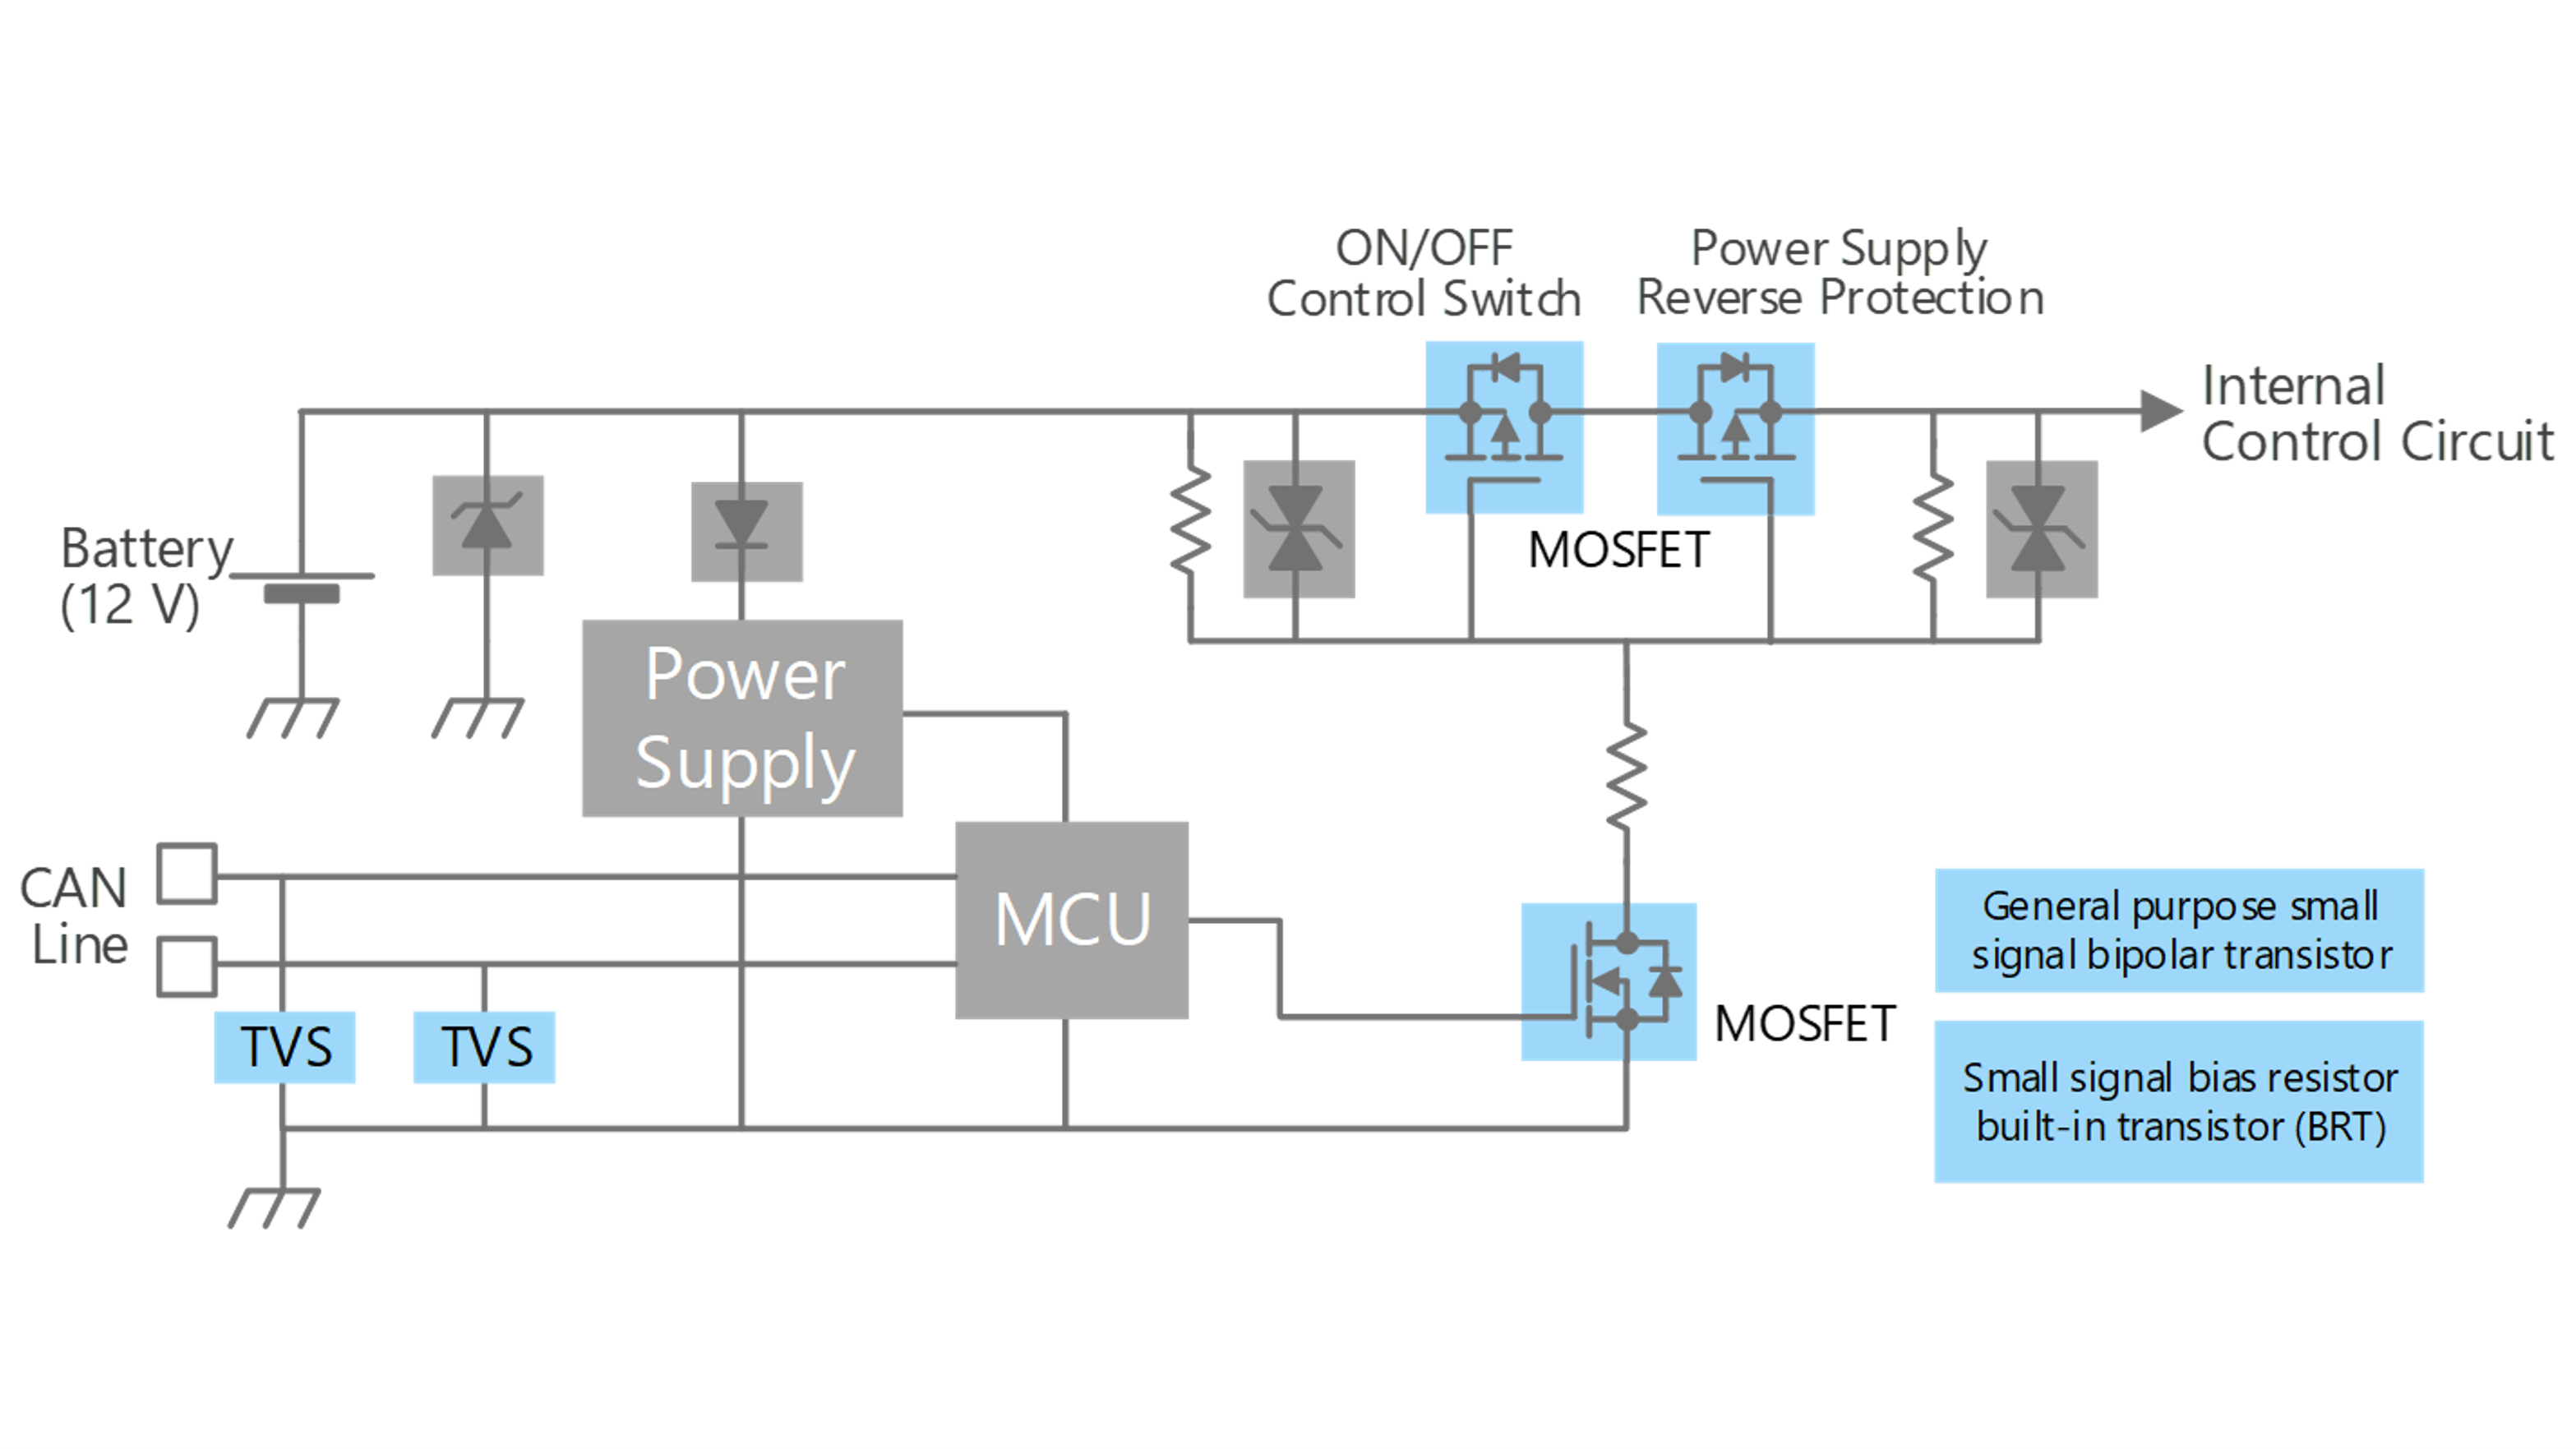 Power supply ON/OFF control and reverse connection protecting circuit (P-ch method)